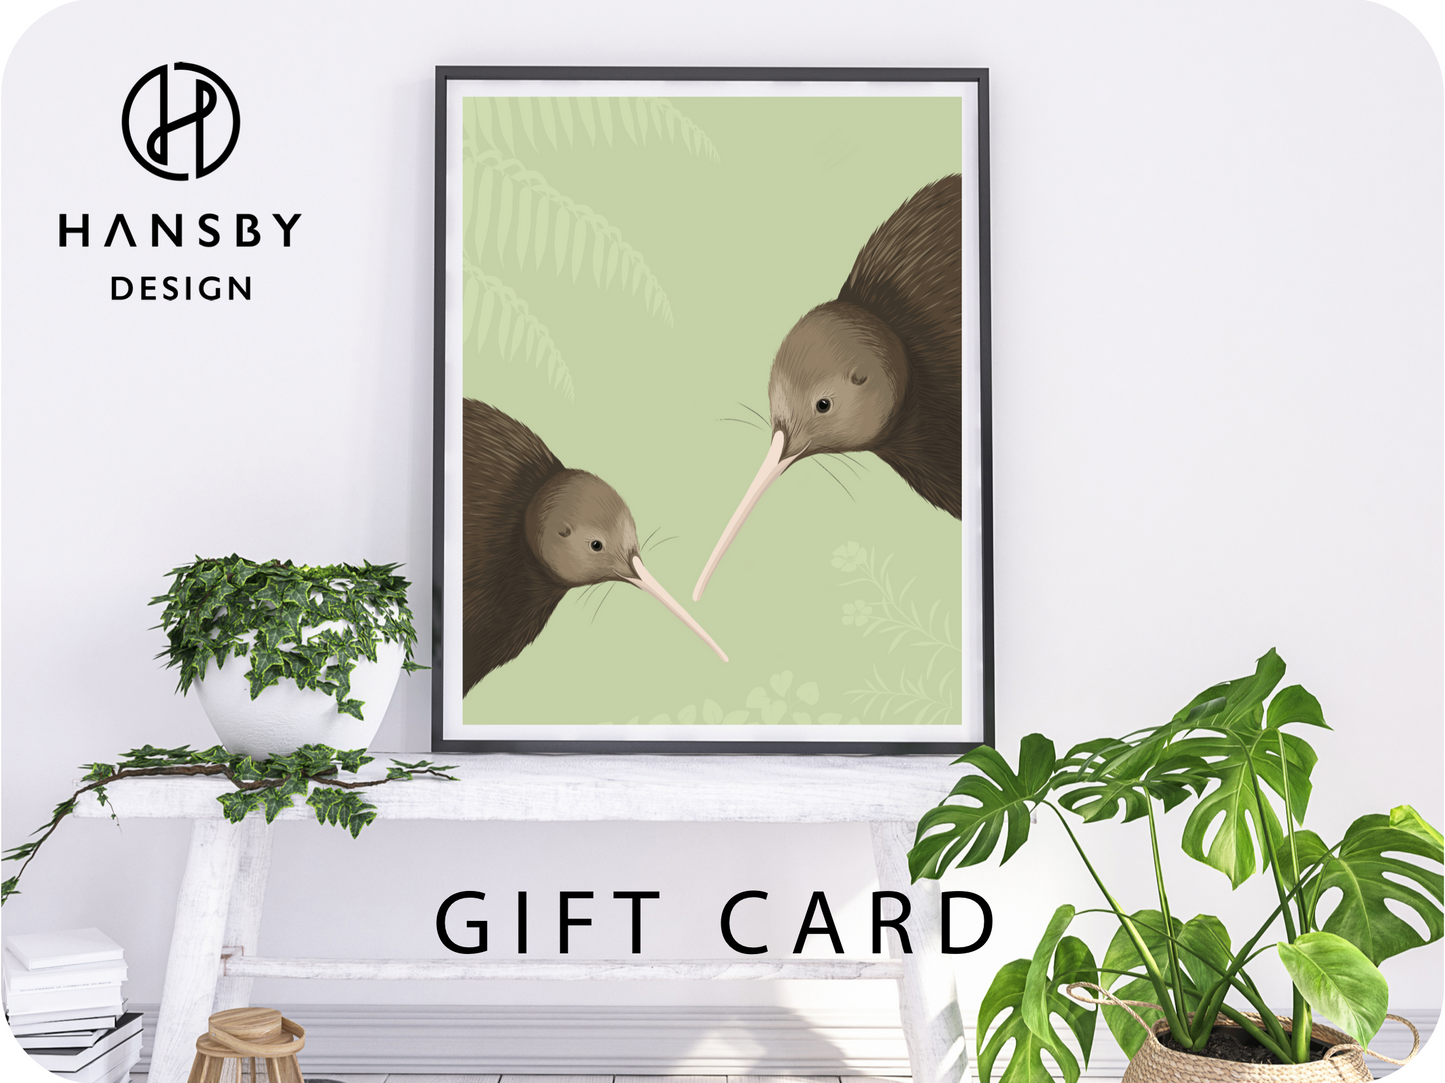 Gift card for Hansby Design wildlife art prints and products, New Zealand